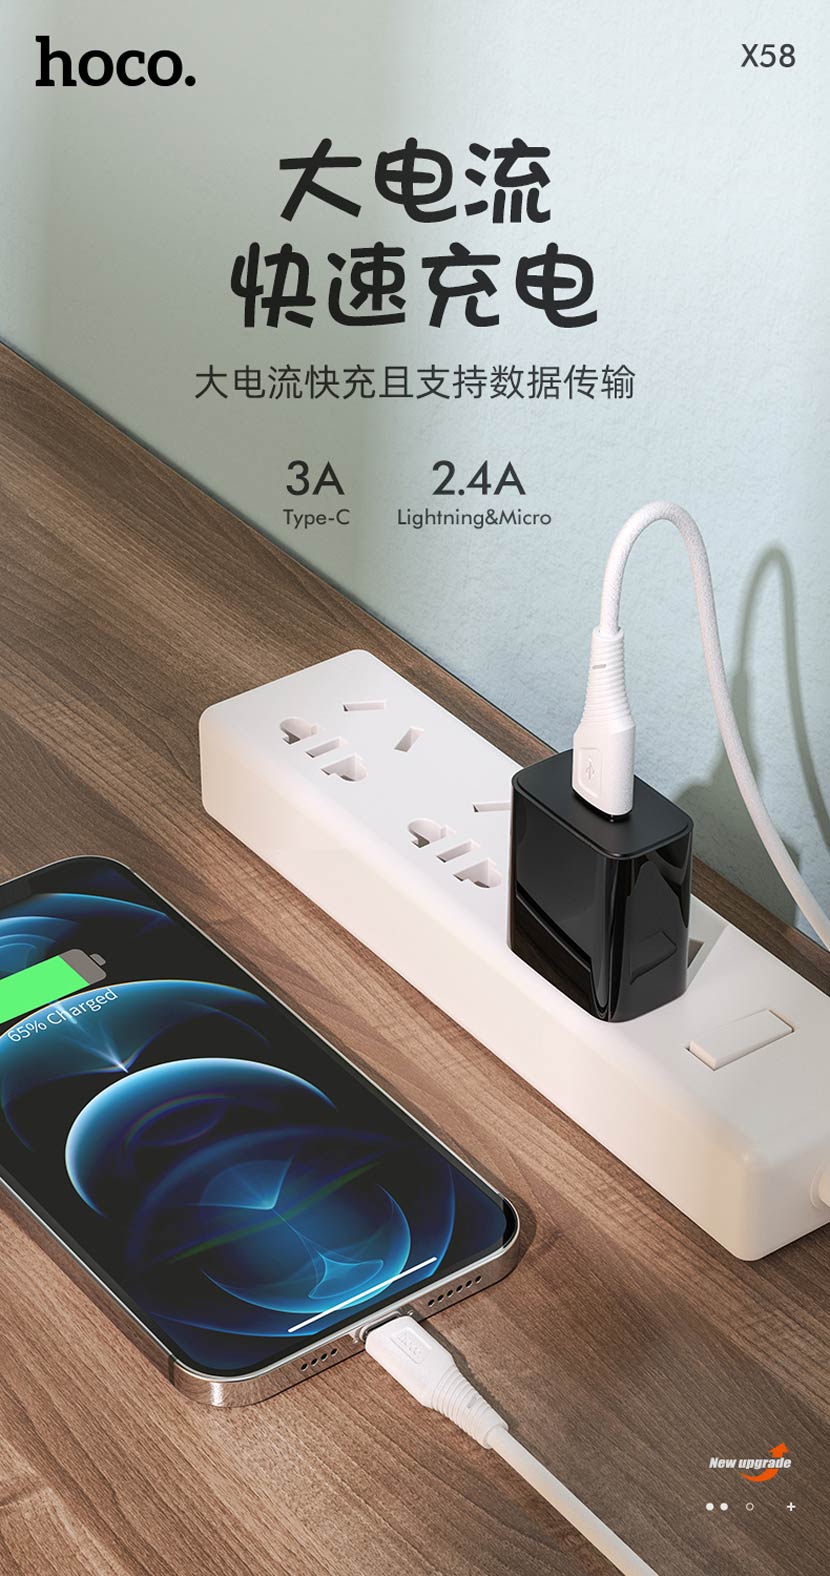 hoco news x58 airy silicone charging data cable current cn